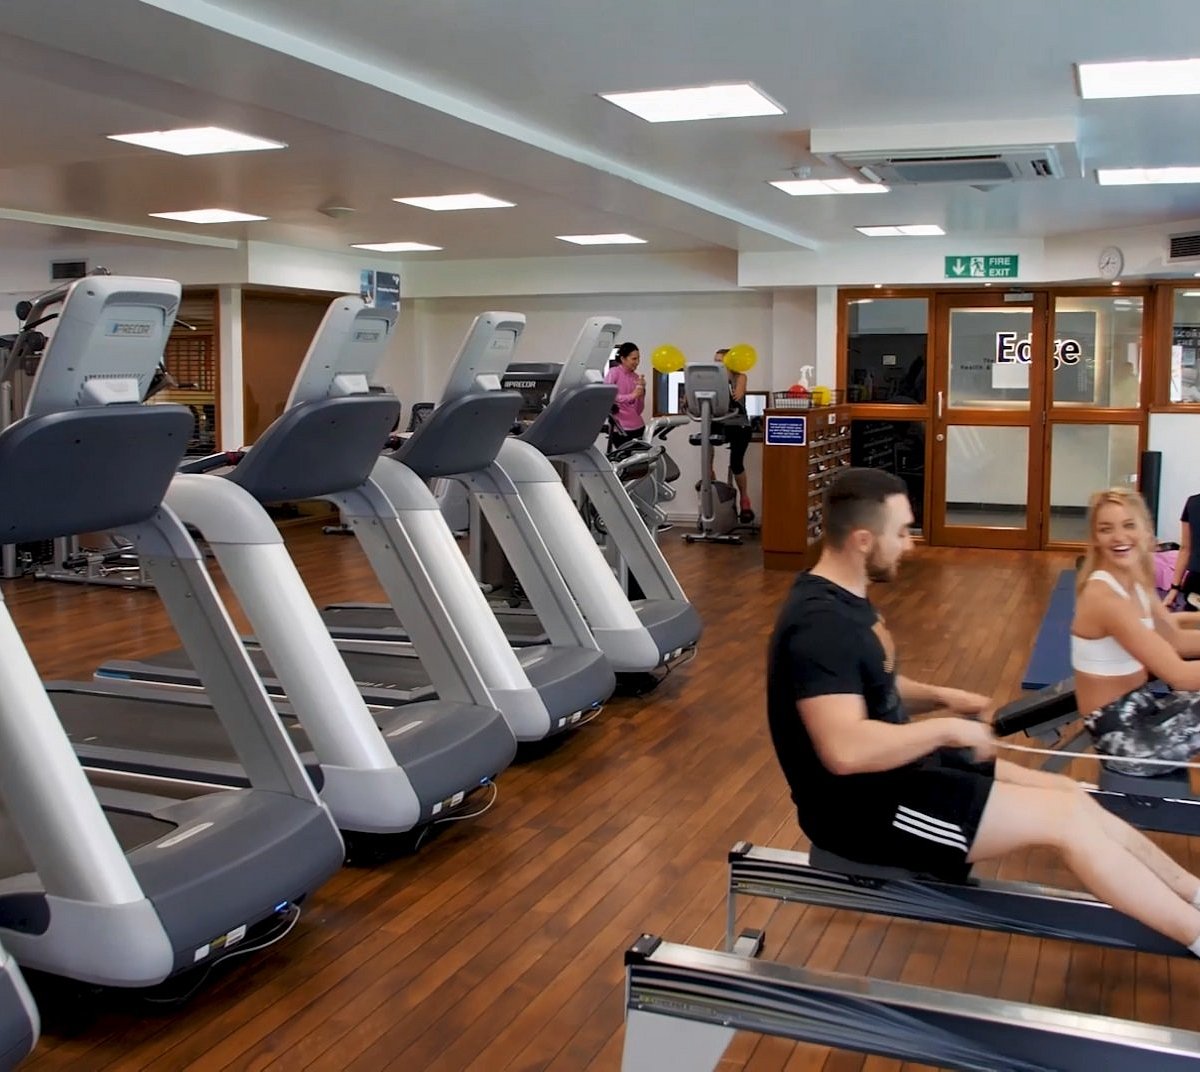 The Edge Health And Fitness Club Norwich All You Need To Know Before